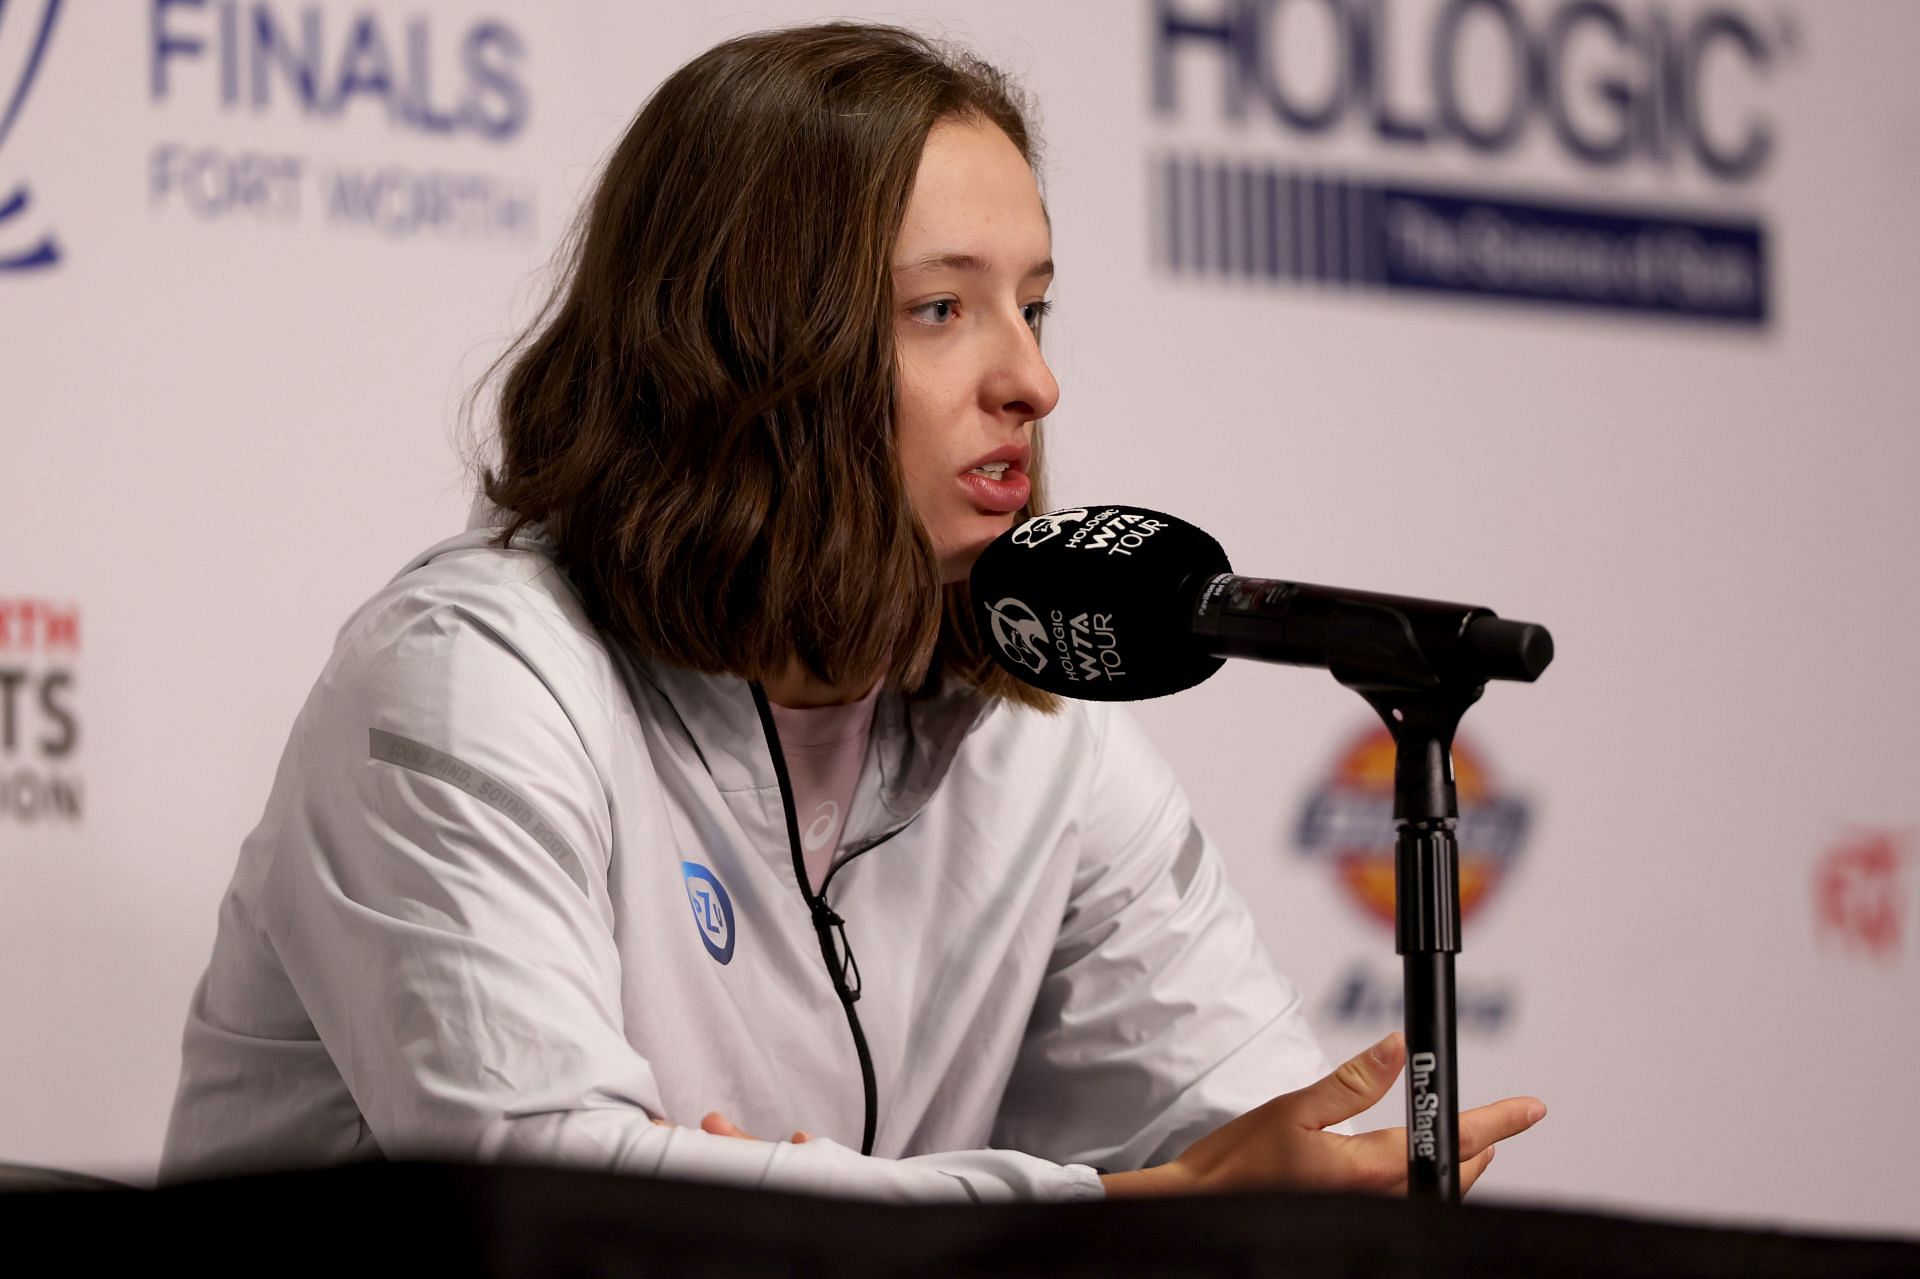 Iga Swiatek fields questions from the media at a press conference ahead of the 2022 WTA Finals 